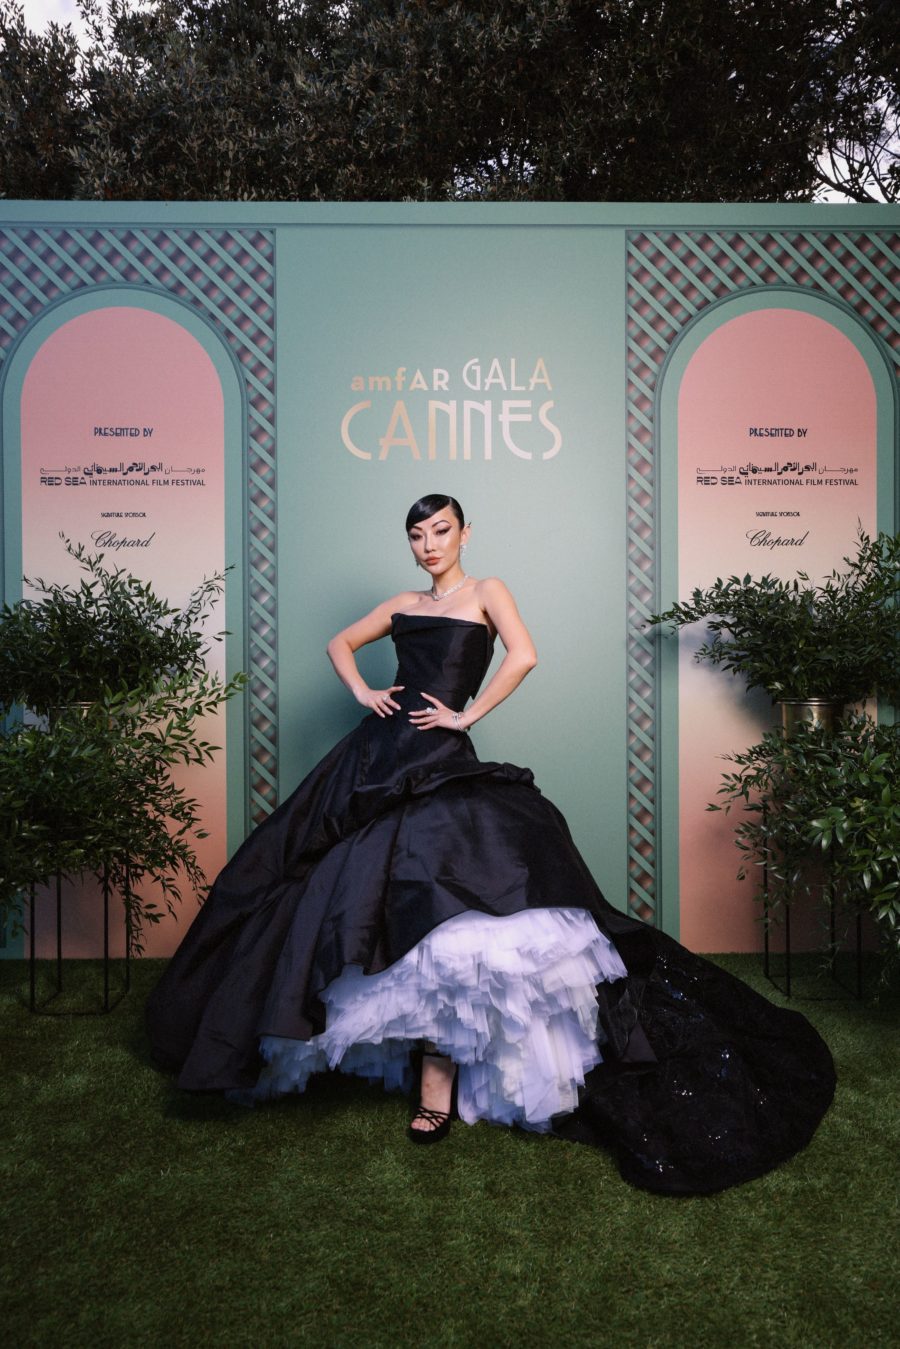 jessica wang wearing a black strapless, a line tulle dress featuring Nicolas Jebran at the cannes film festival 2021 // Jessica Wang - Notjessfashion.com